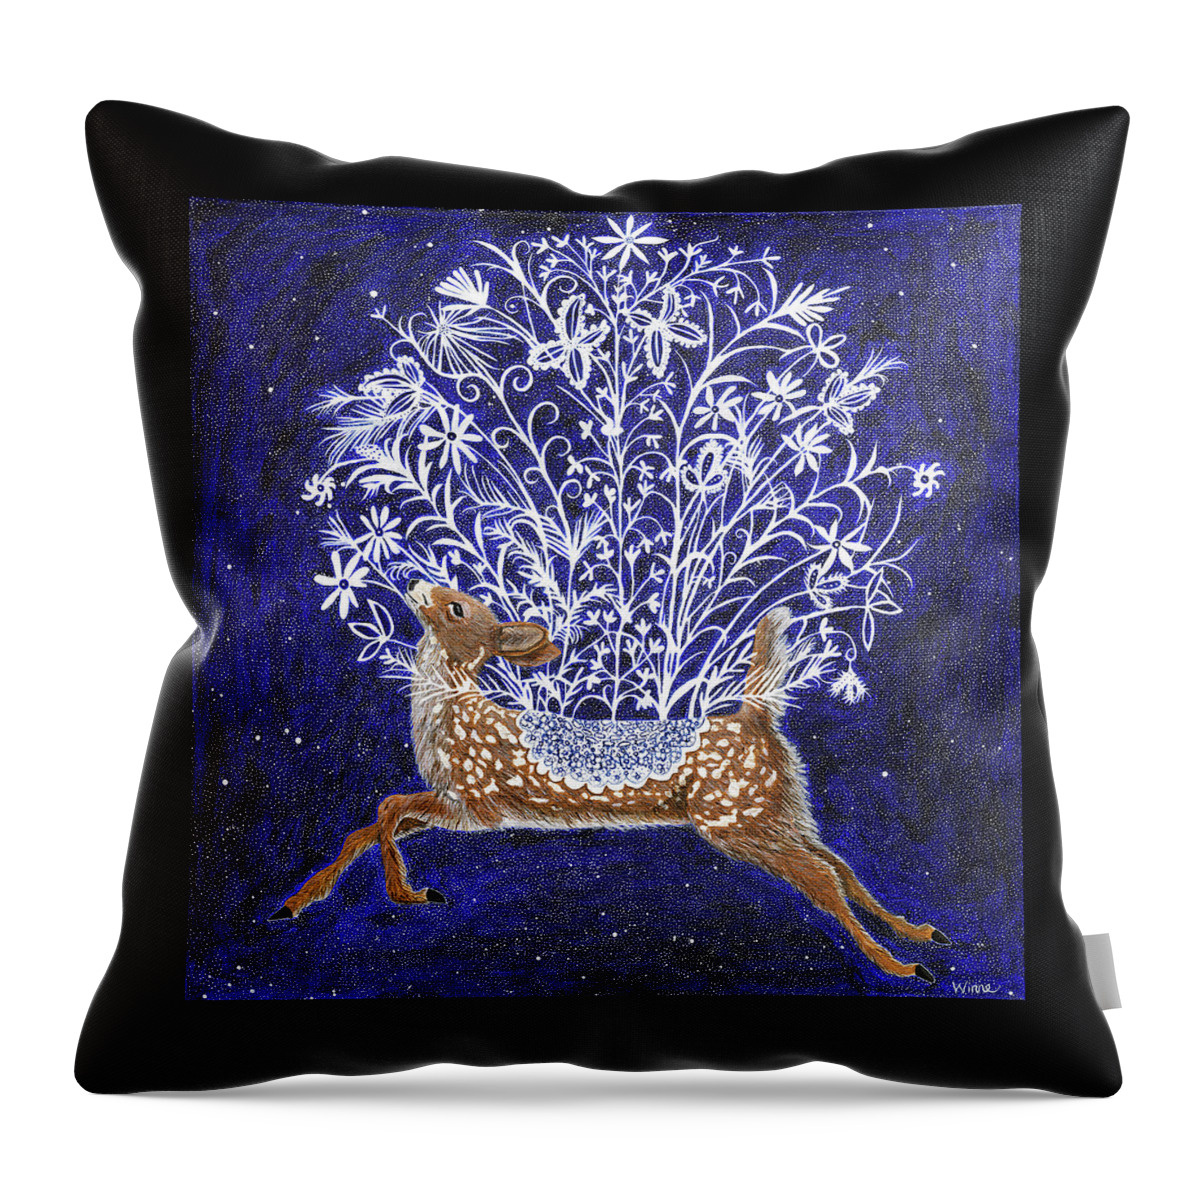 Lise Winne Throw Pillow featuring the painting Fawn Bouquet by Lise Winne